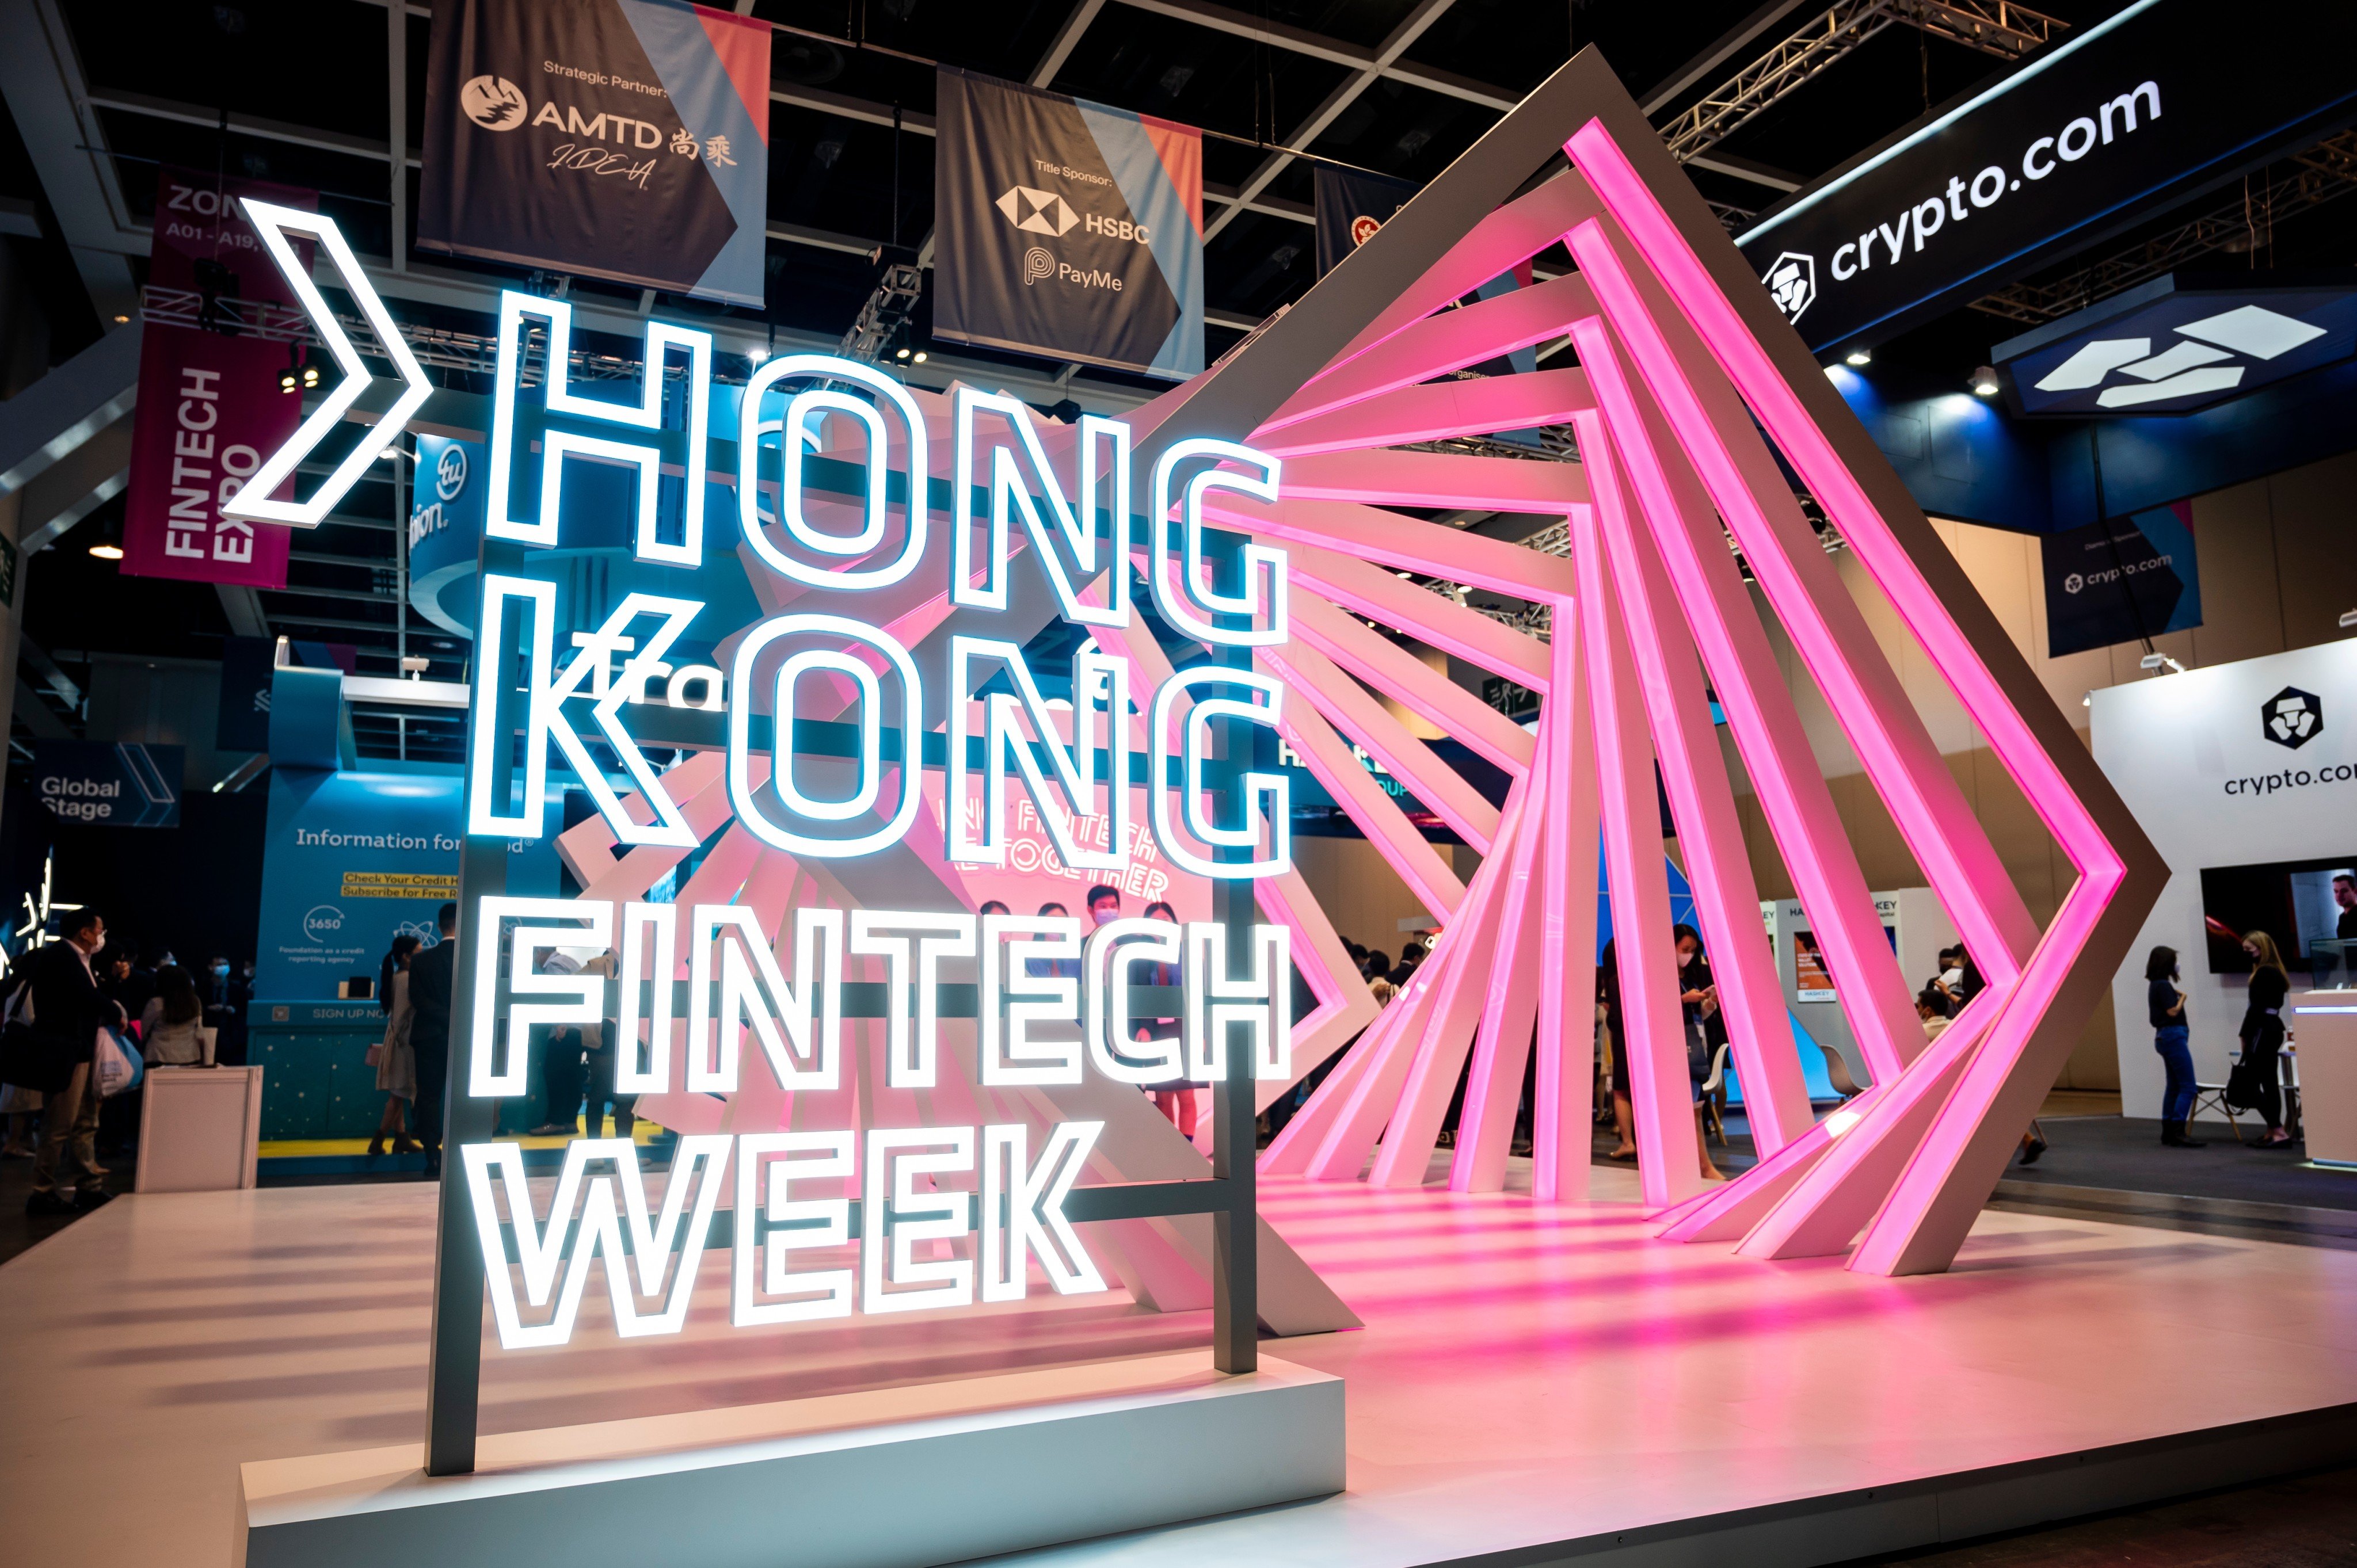 Hong Kong announced its intention to overhaul crypto regulations in an effort to become a virtual asset hub just head of its FinTech Week event last fall. Photo: Shutterstock